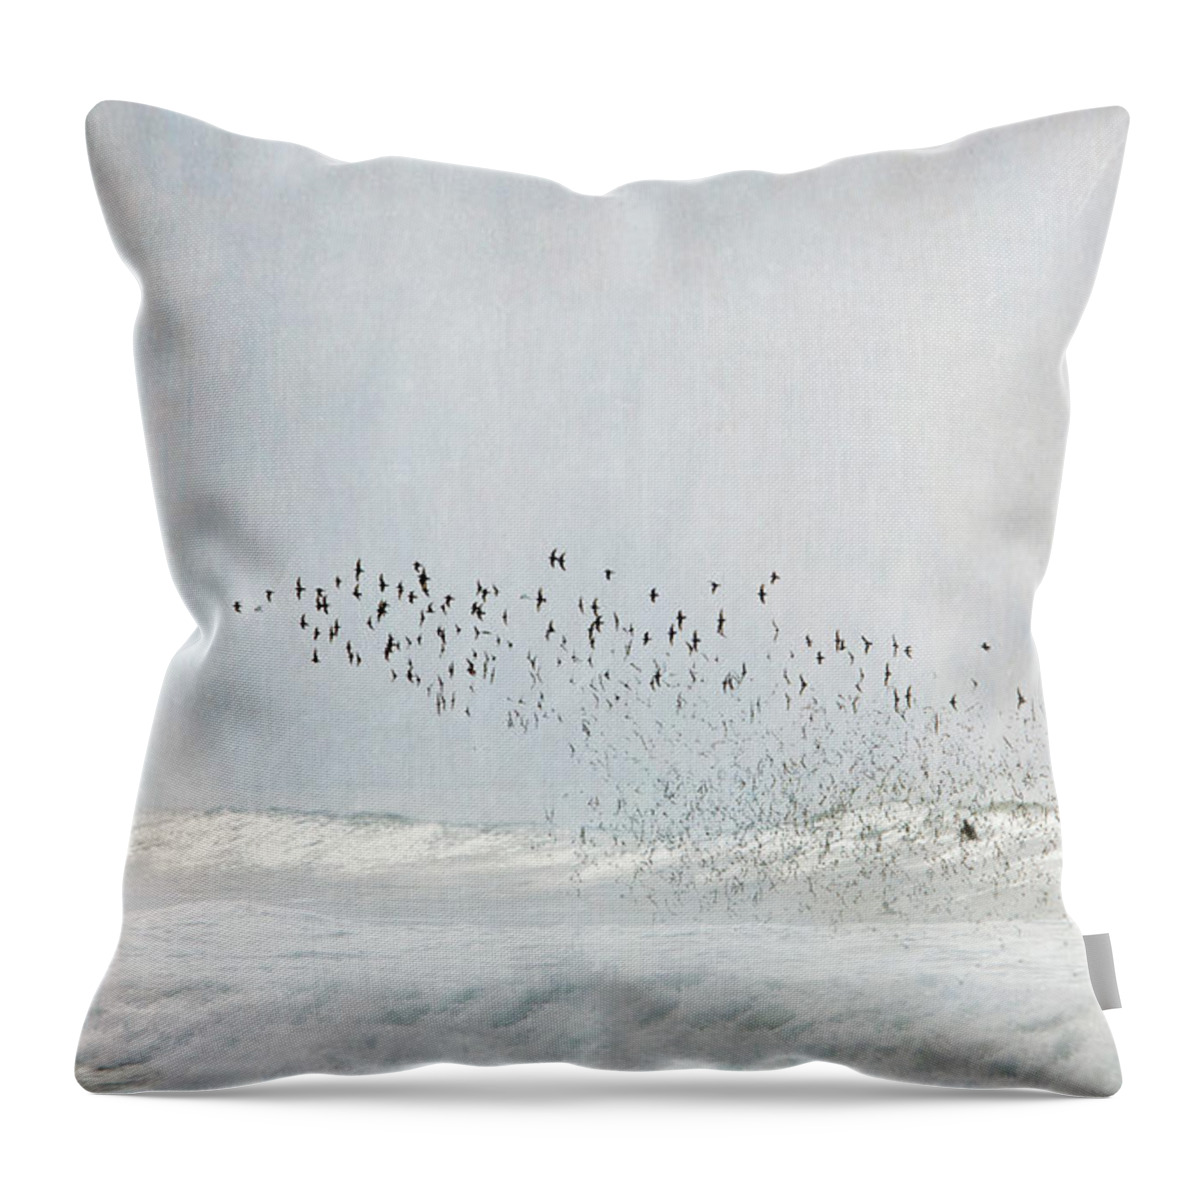 Animal Themes Throw Pillow featuring the photograph Birds With Sea by Susangaryphotography